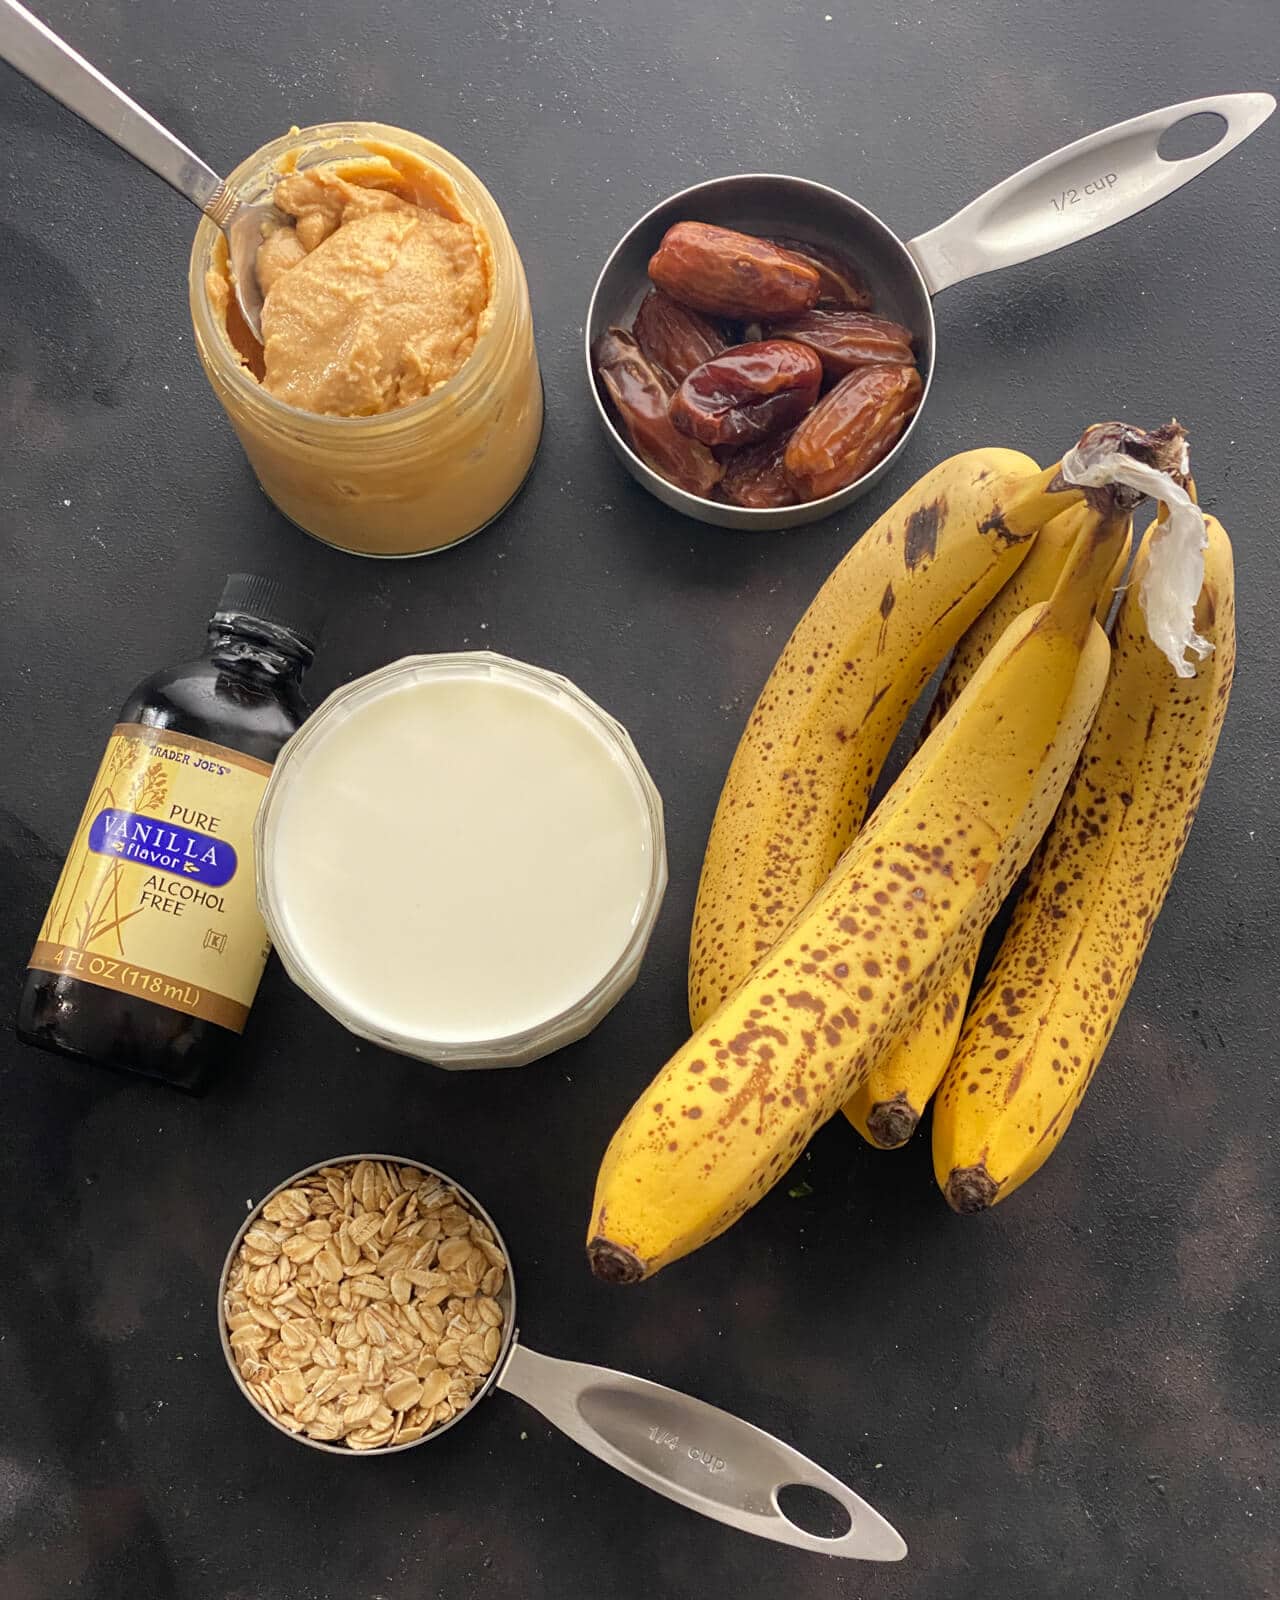 Ingredients for peanut Butter Banana Smoothie - Oats, Banana, Peanut Butter, Vanilla Essence, Dates and milk